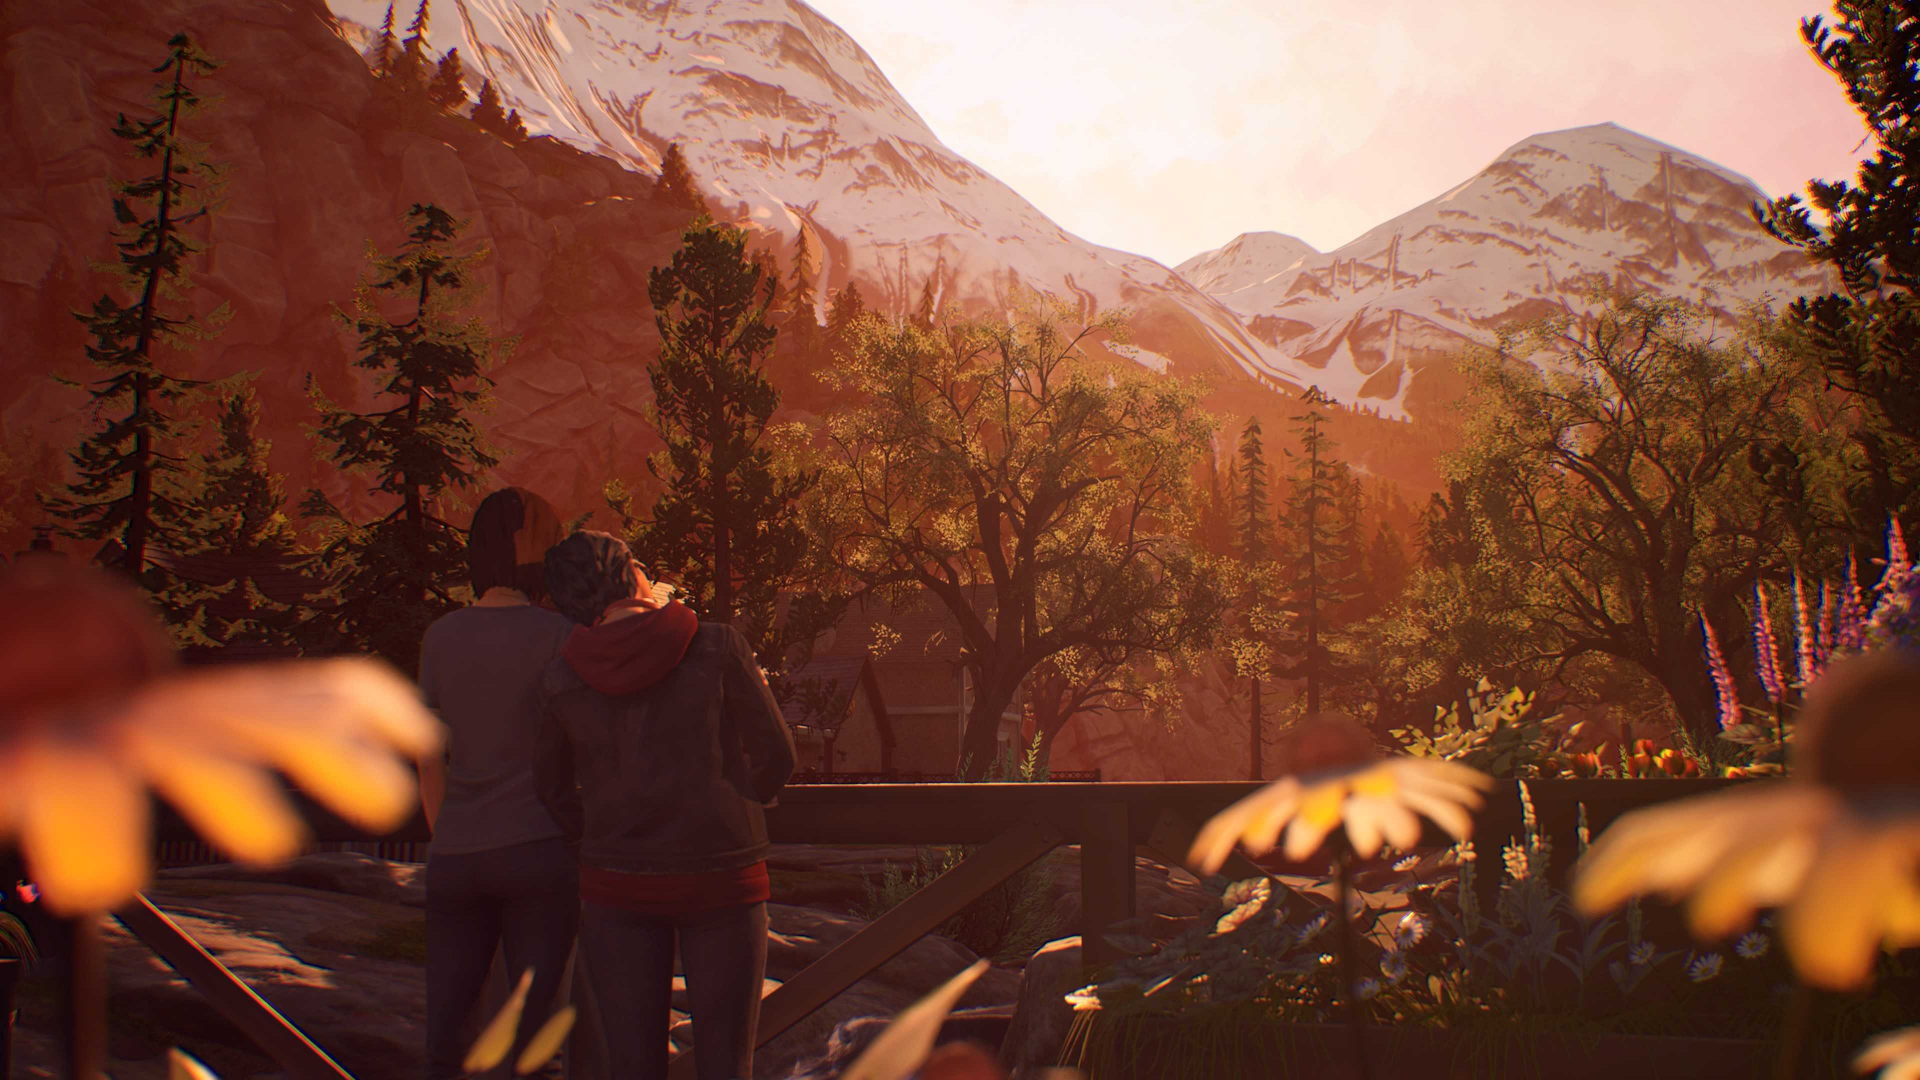 Life is Strange: True Colors review: you can finally binge - The Verge